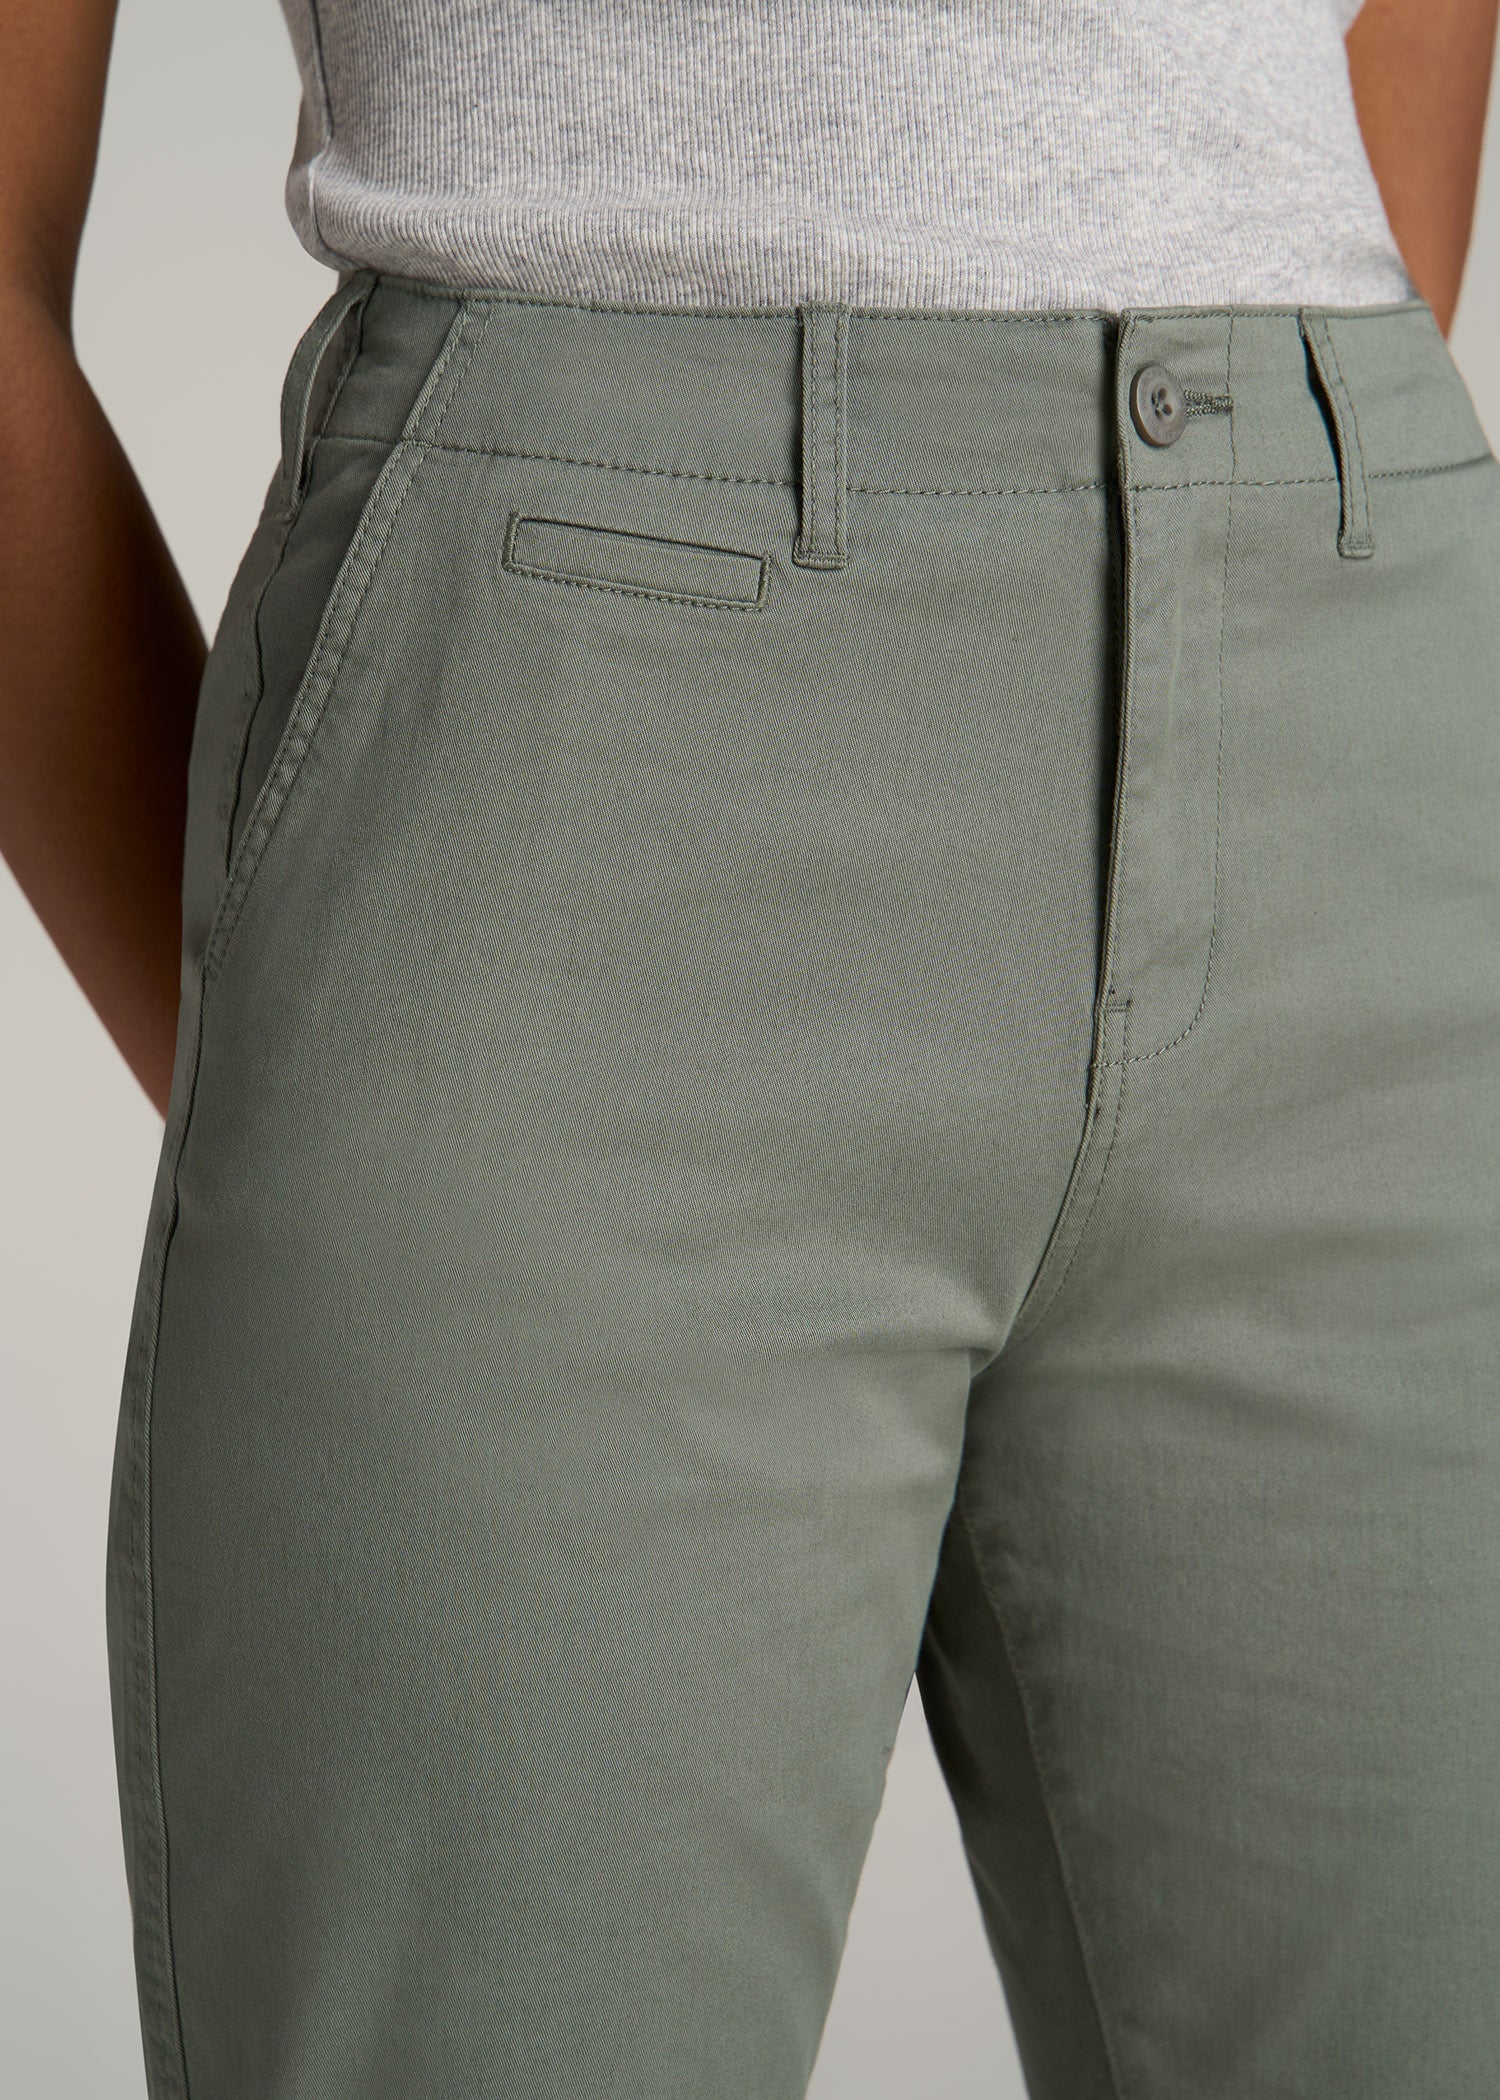 High Rise Tapered Chino Pants for Tall Women | American Tall